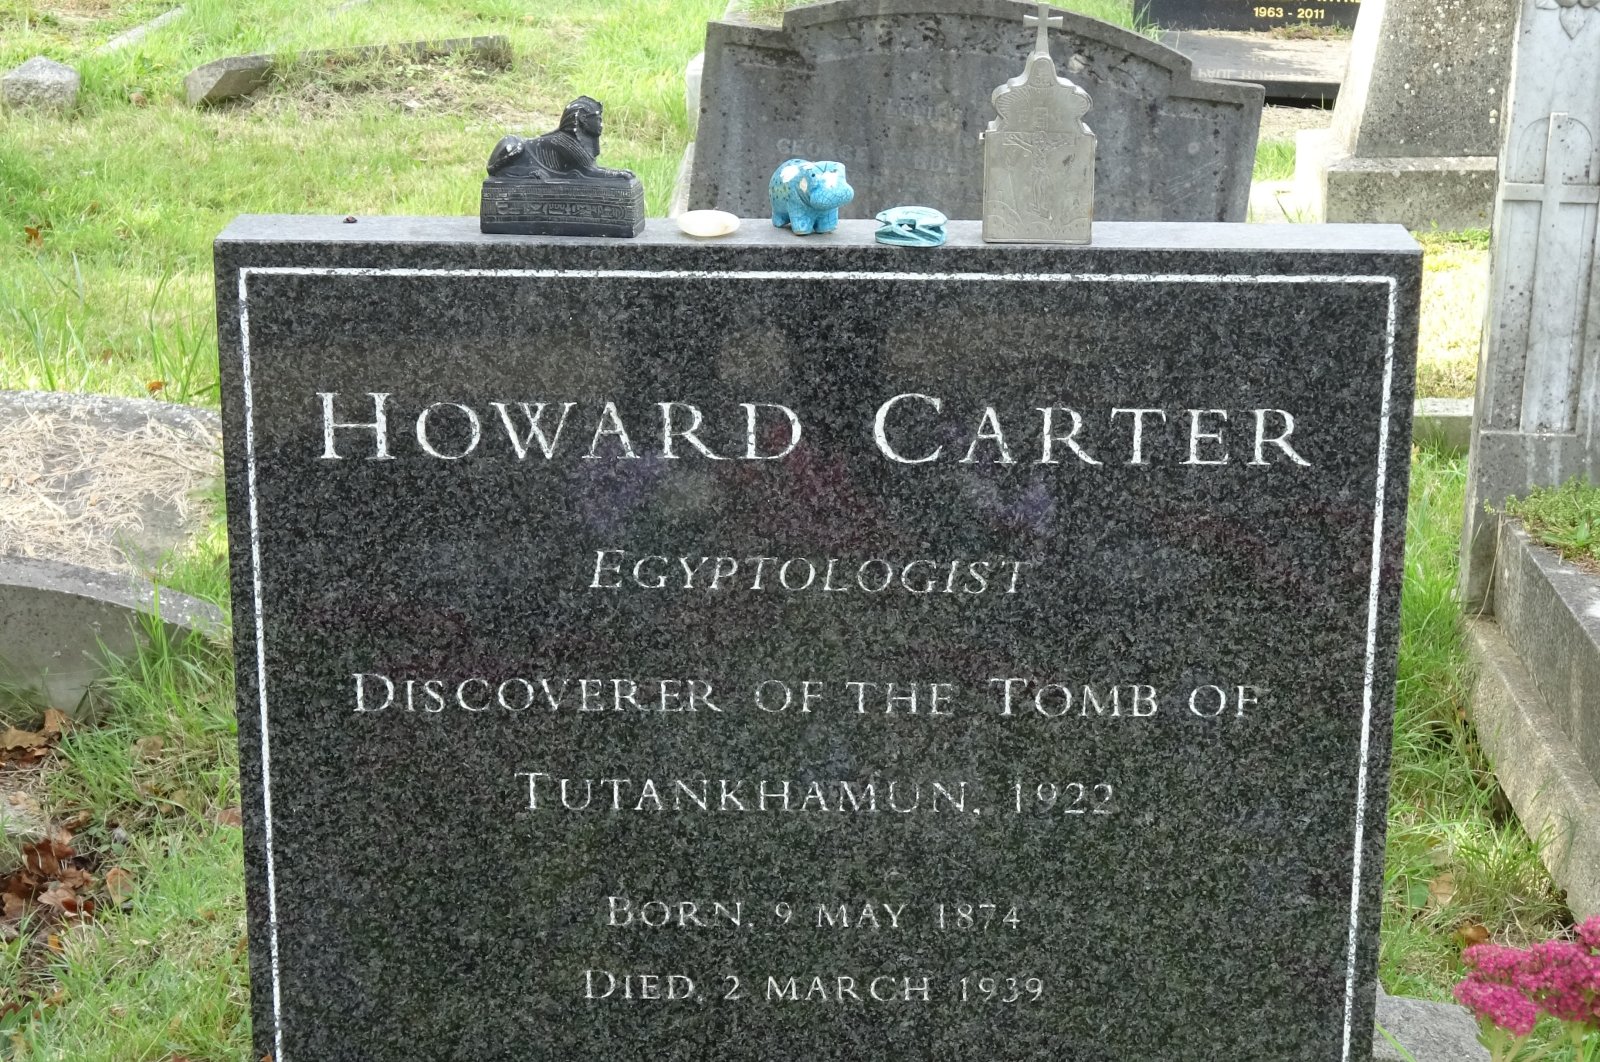 The gravestone of Egyptologist Howard Carter lies at the Putney Vale Cemetery, London, U.K. (Photo by A. Peter Dore)